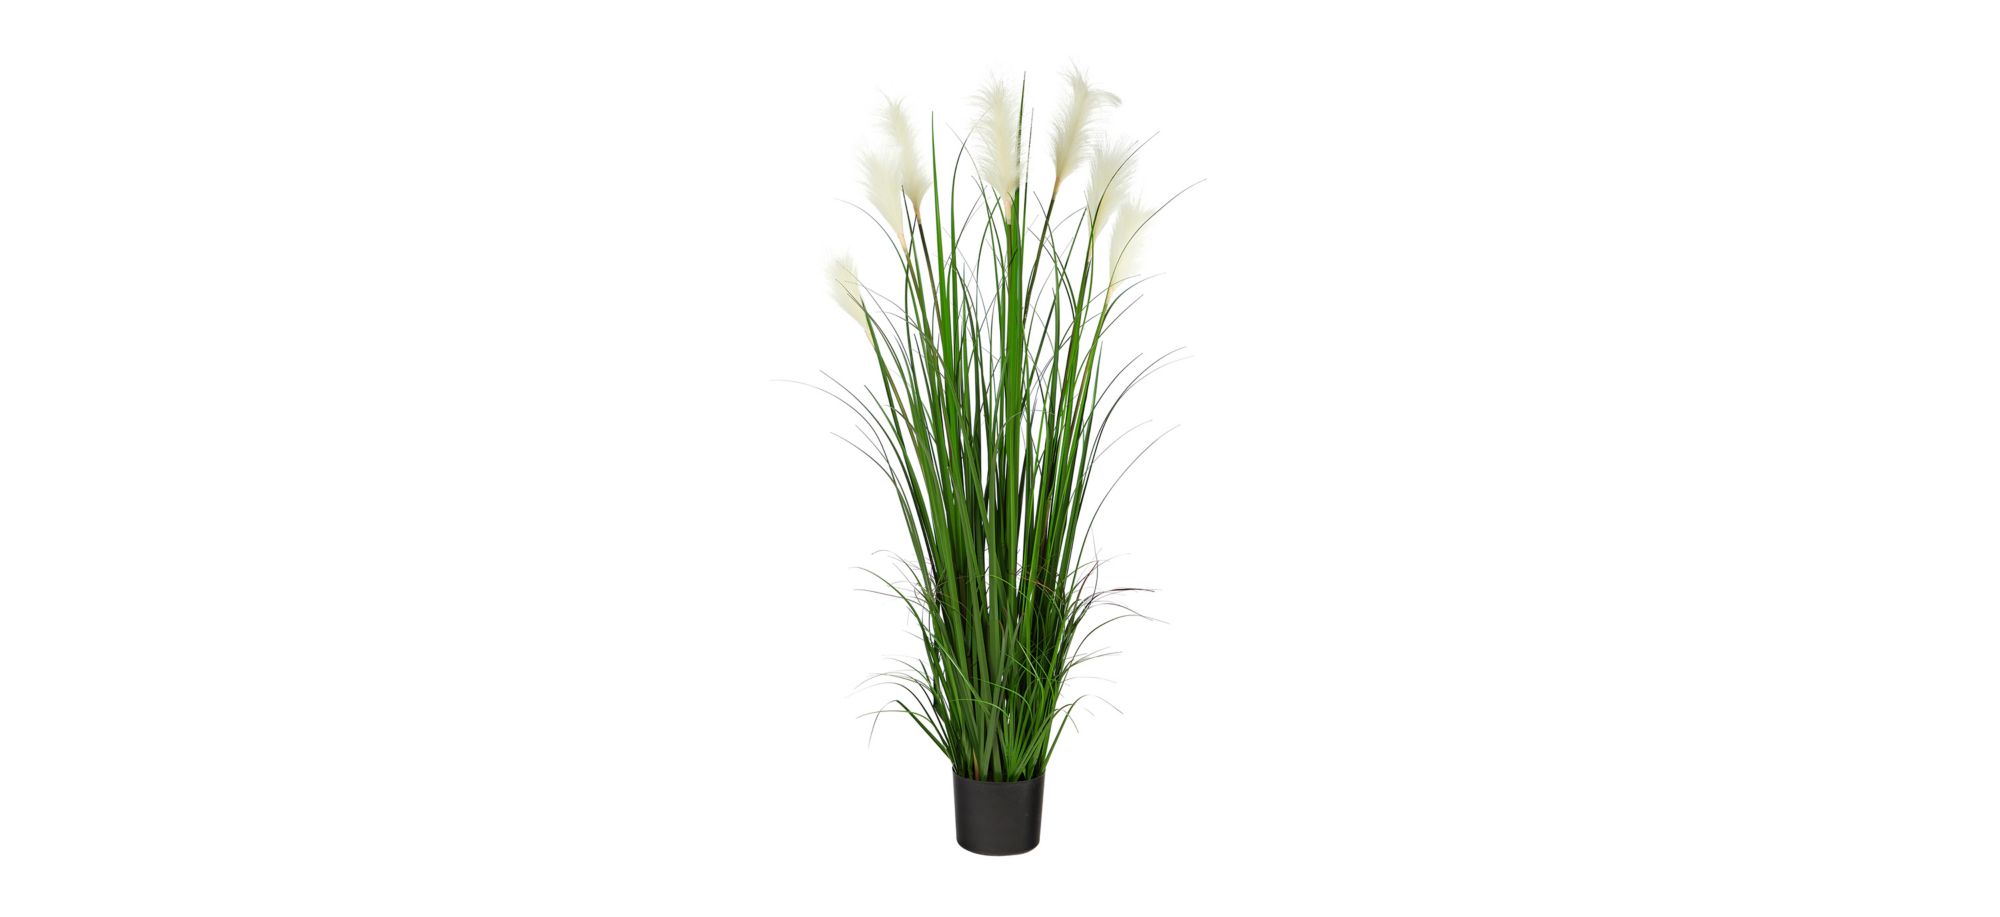 4.5ft. Plume Grass Artificial Plant in Green by Bellanest